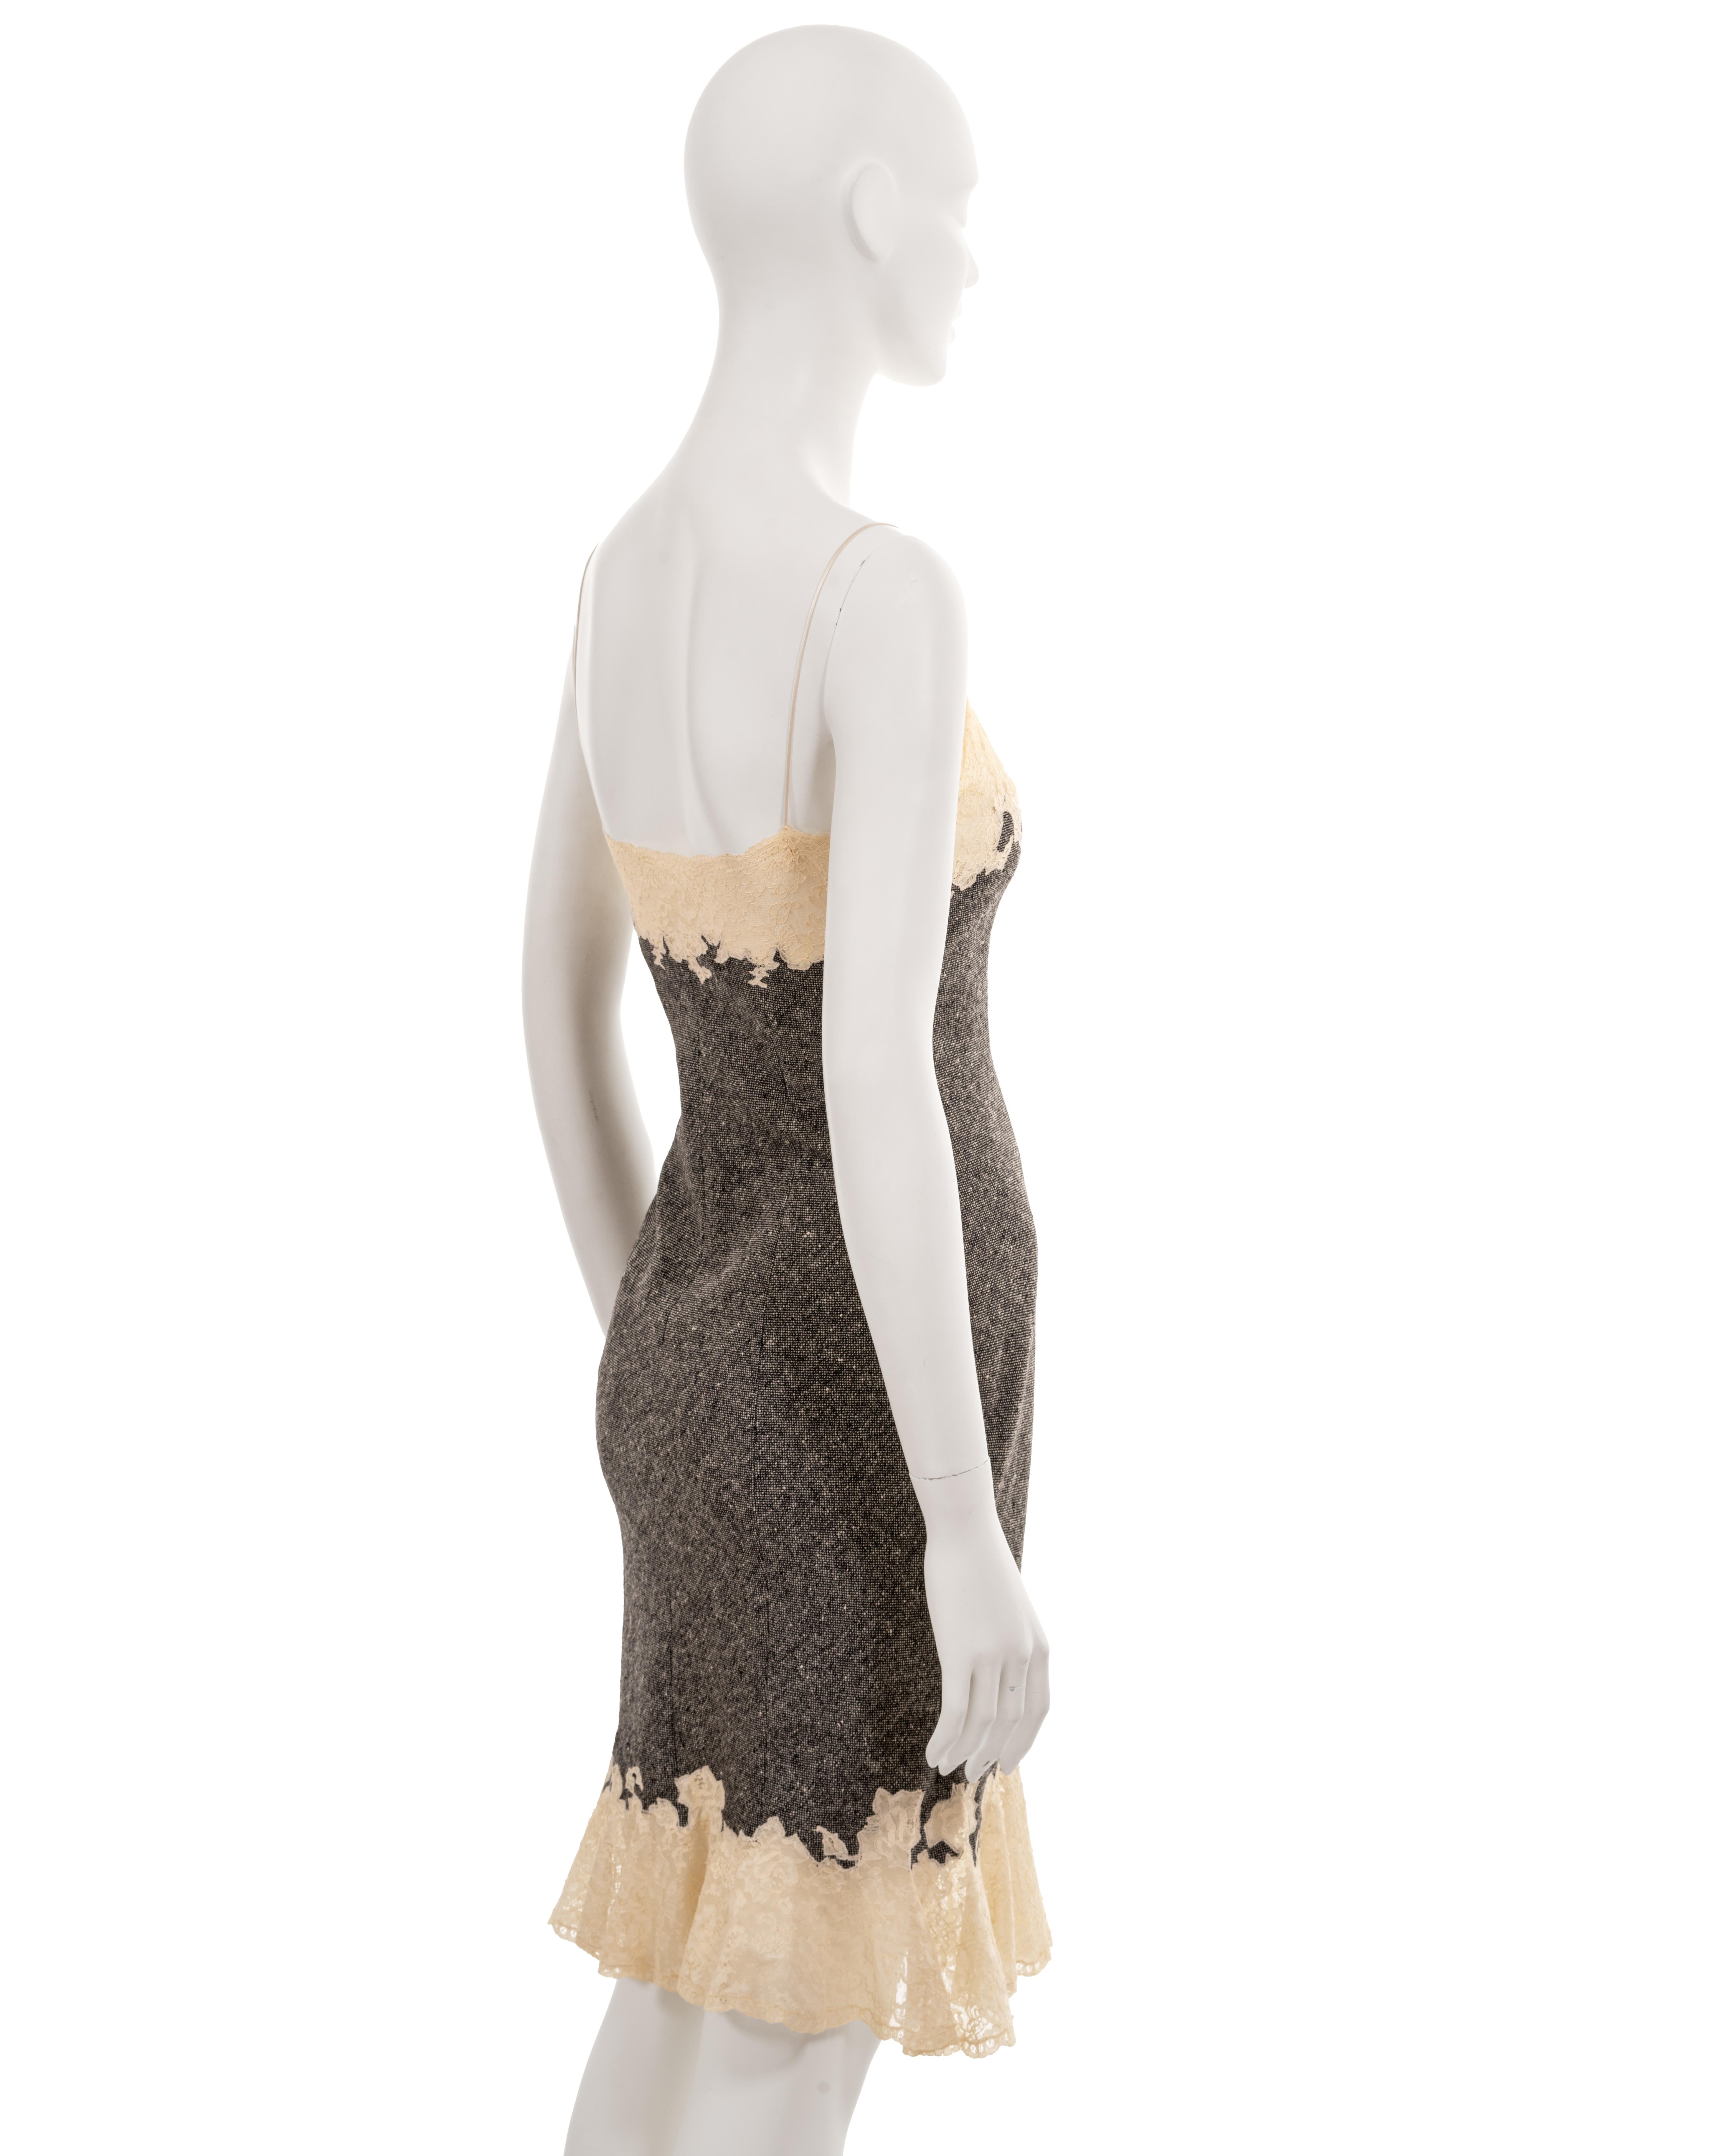 Christian Dior by John Galliano grey tweed slip dress with lace trim, fw 1998 For Sale 3